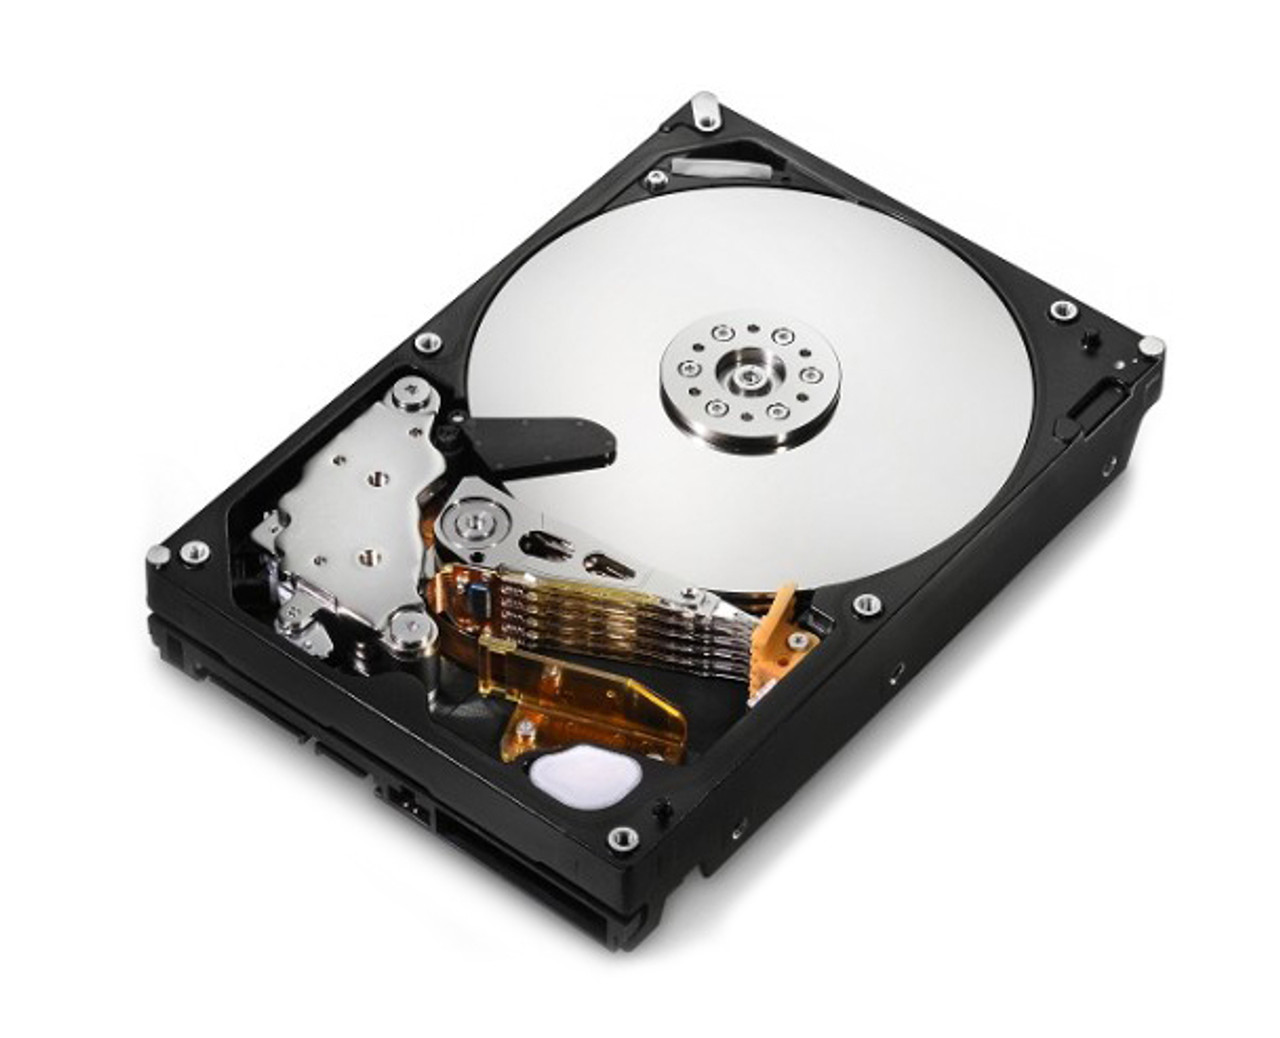 81Y9693 - IBM 1TB 7200RPM 6GB/s NL SAS 2.5-inch SFF Hot Swapable Hard Drive with Tray